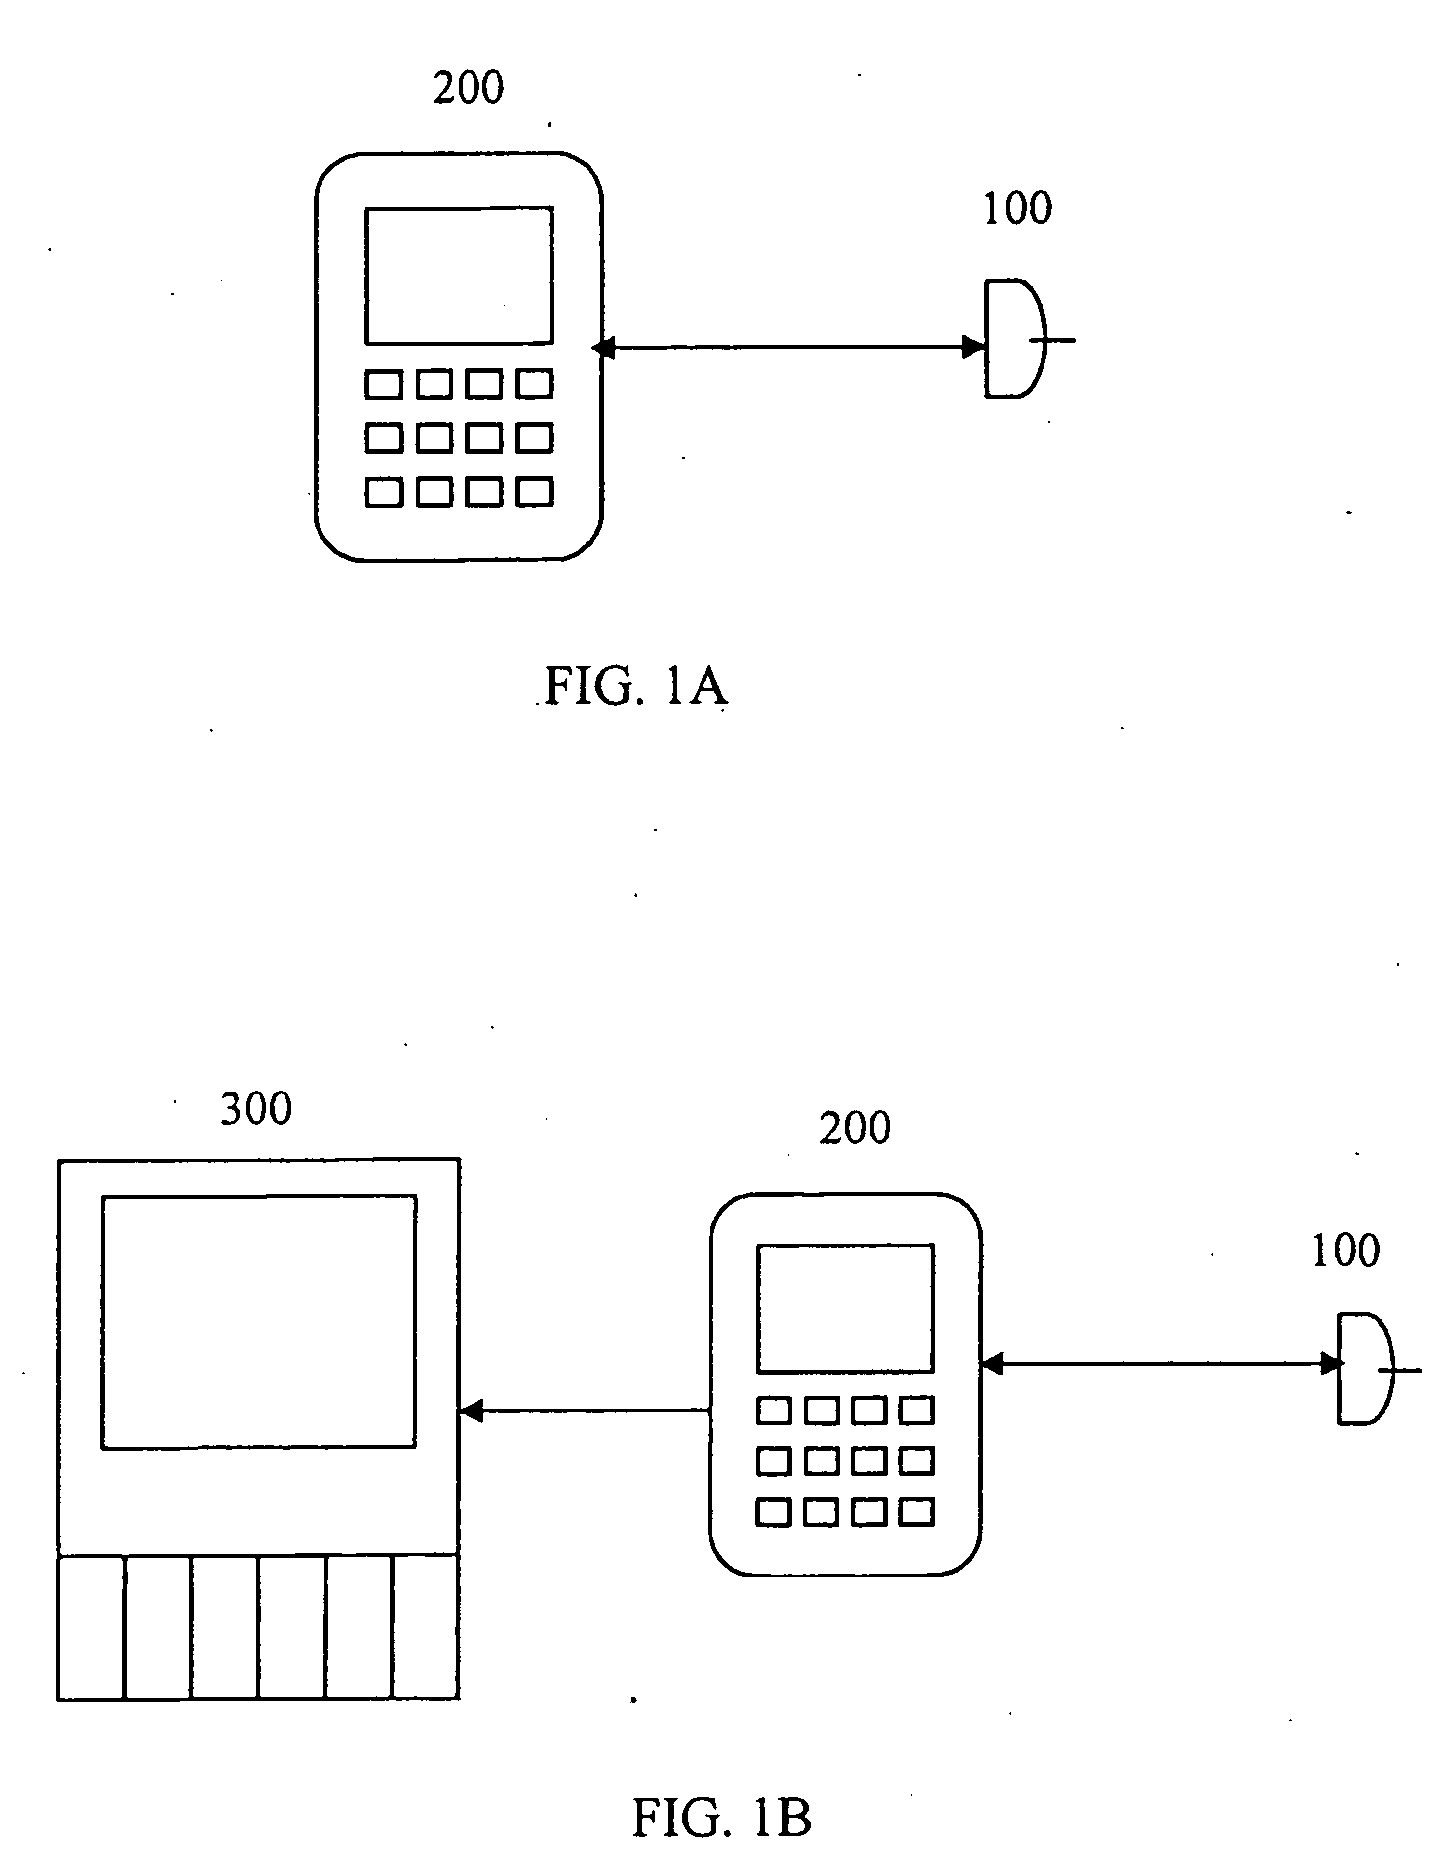 Analyte sensing apparatus for hospital use